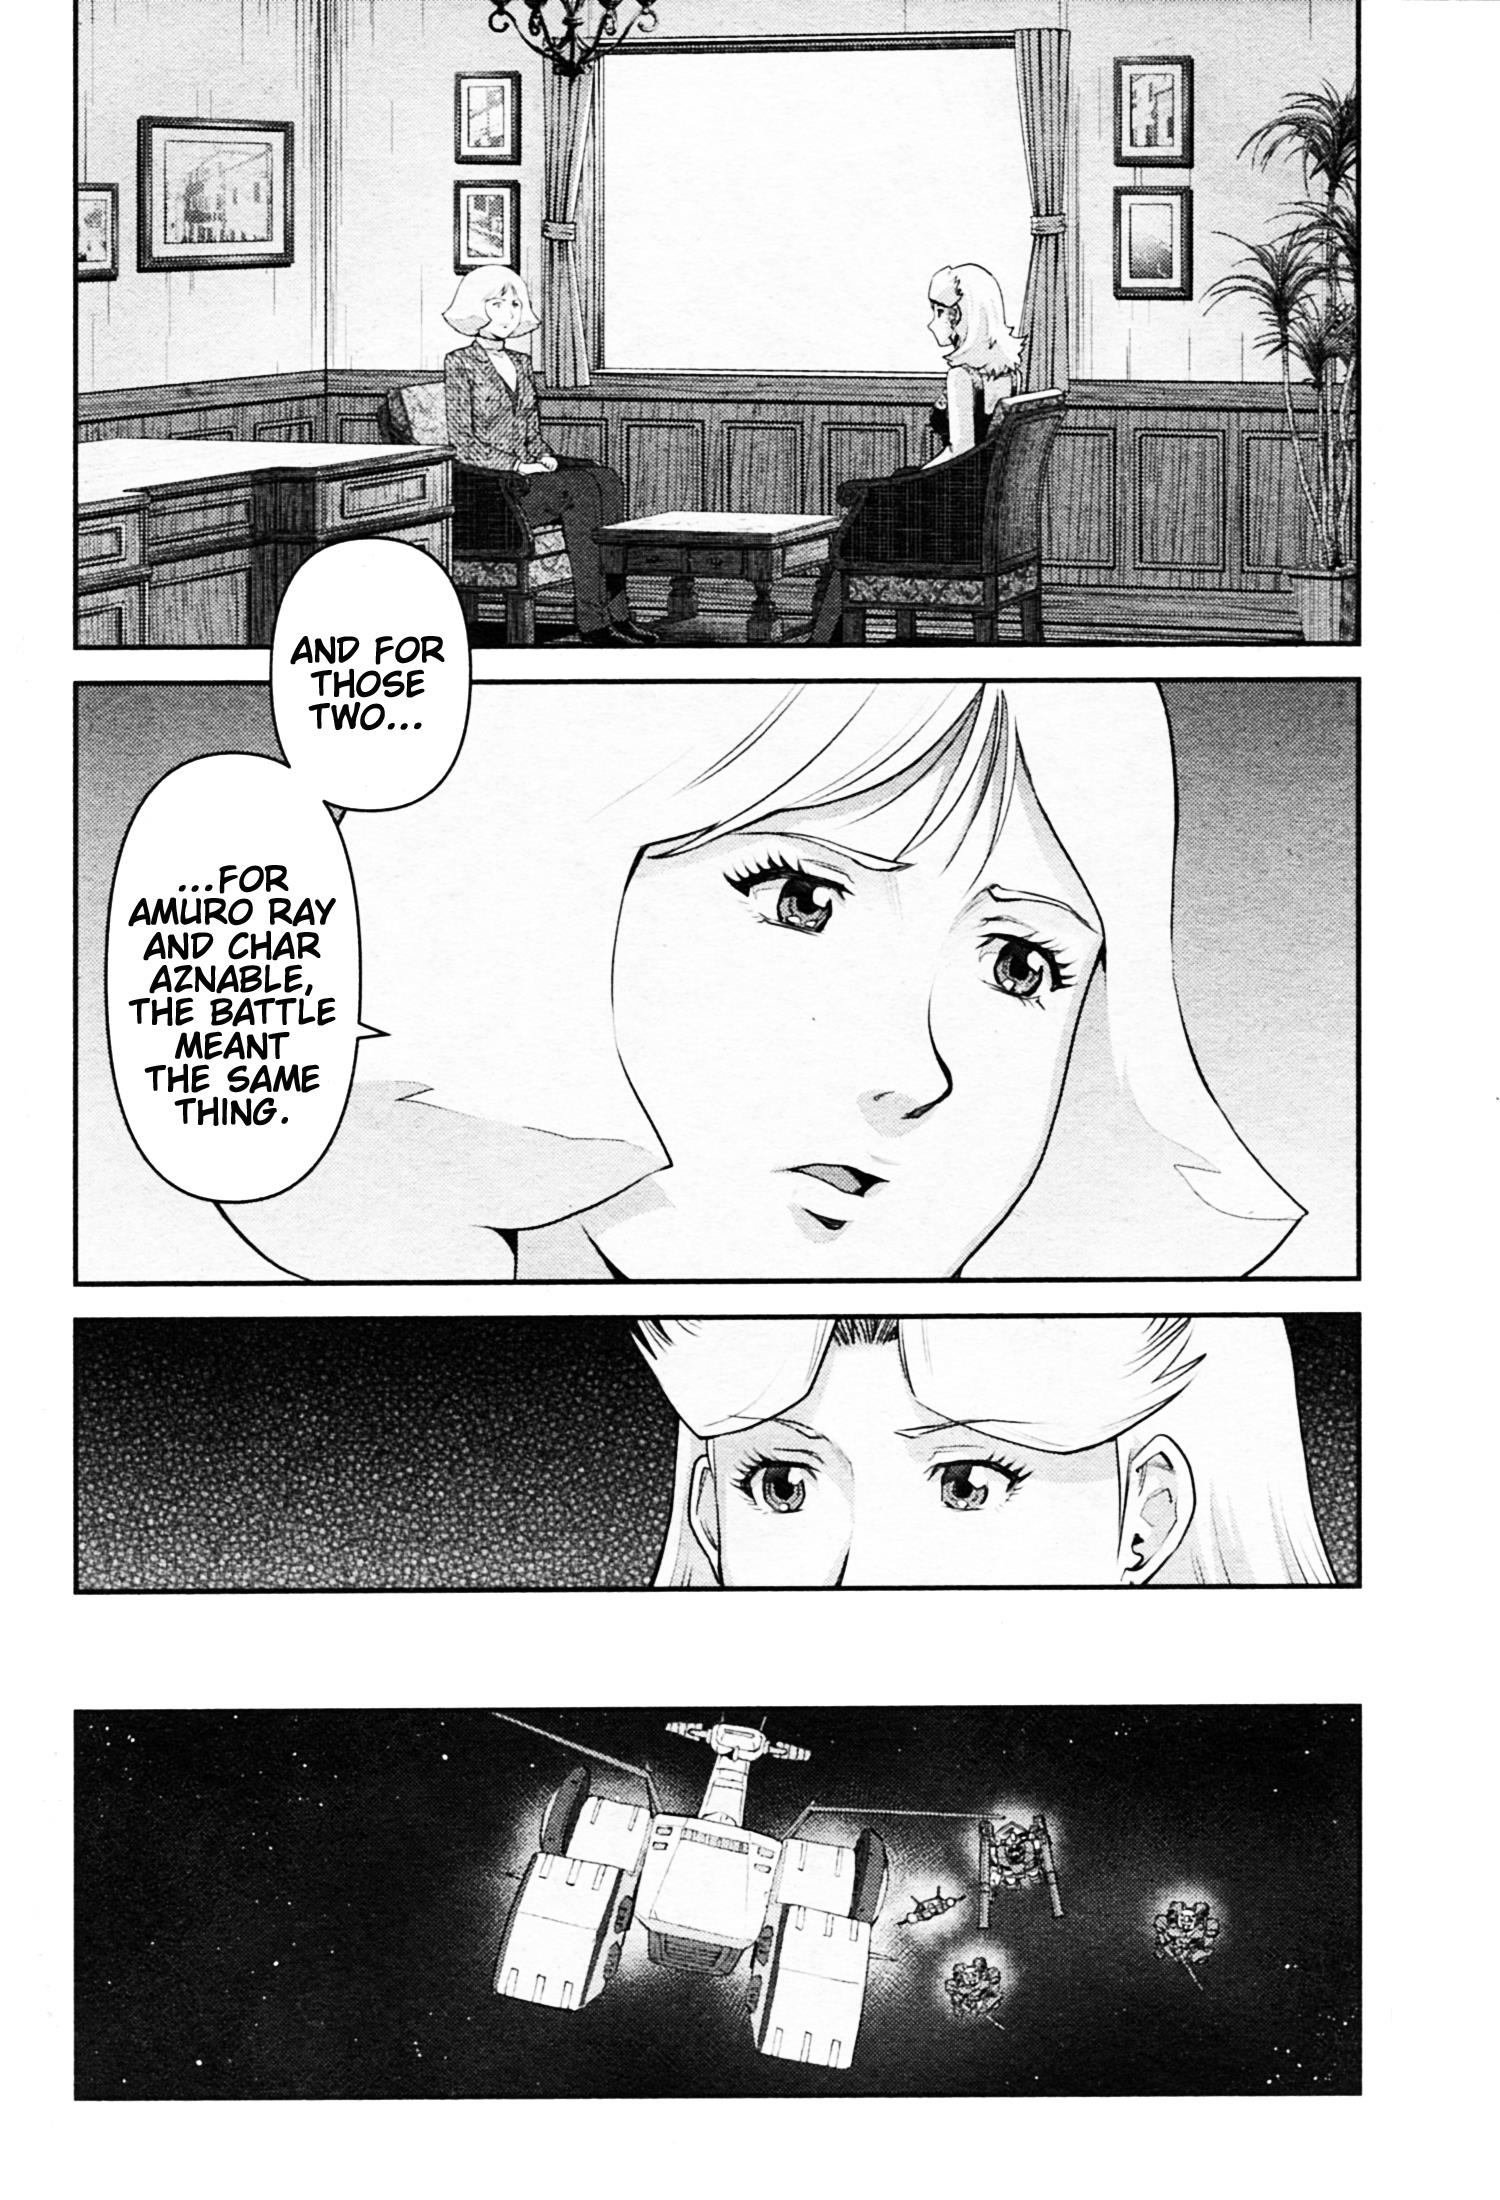 Mobile Suit Gundam Pulitzer - Amuro Ray Beyond The Aurora Vol.2 Chapter 14: Report 14: Sayla Mass (Part 3) - Picture 2